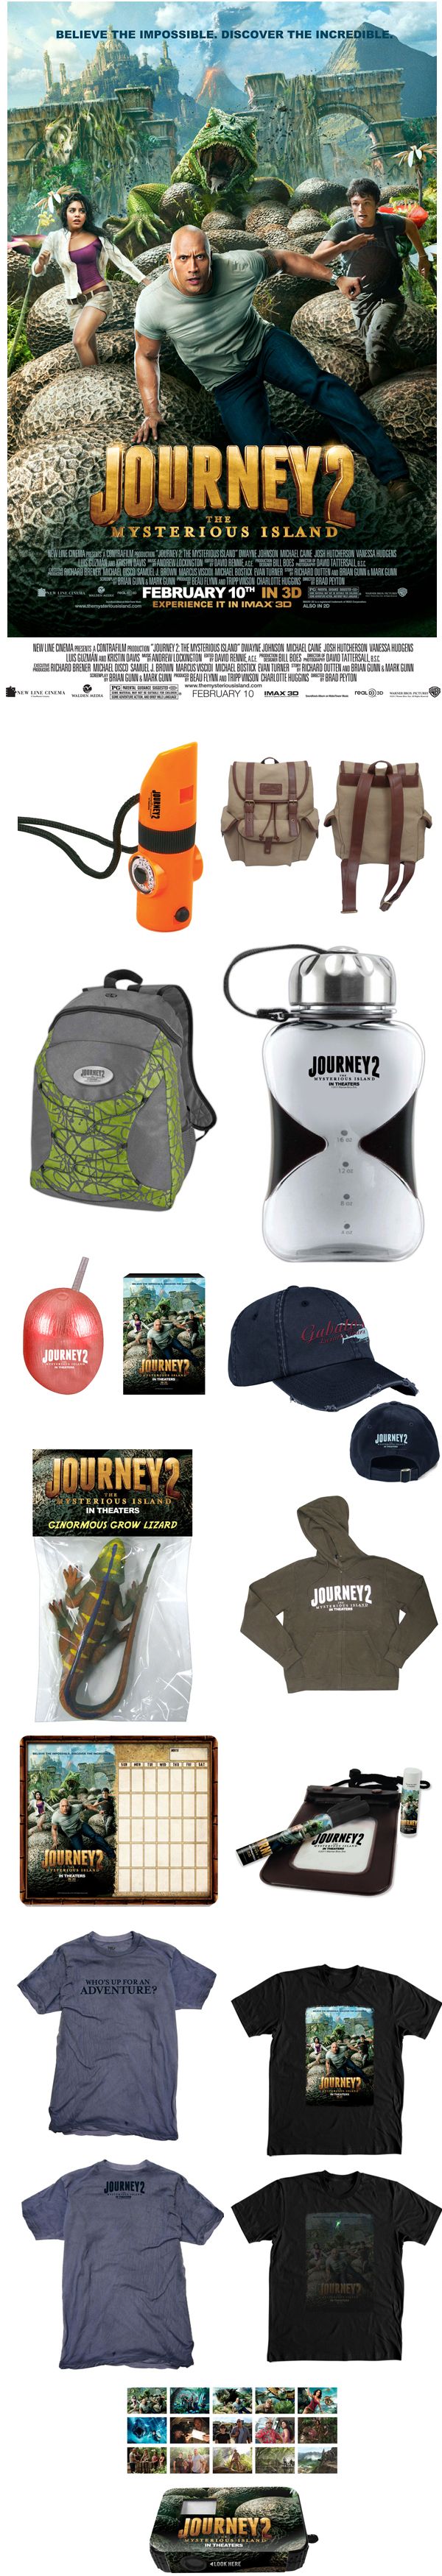 Journey2 The Mysterious Island giveaway contest image